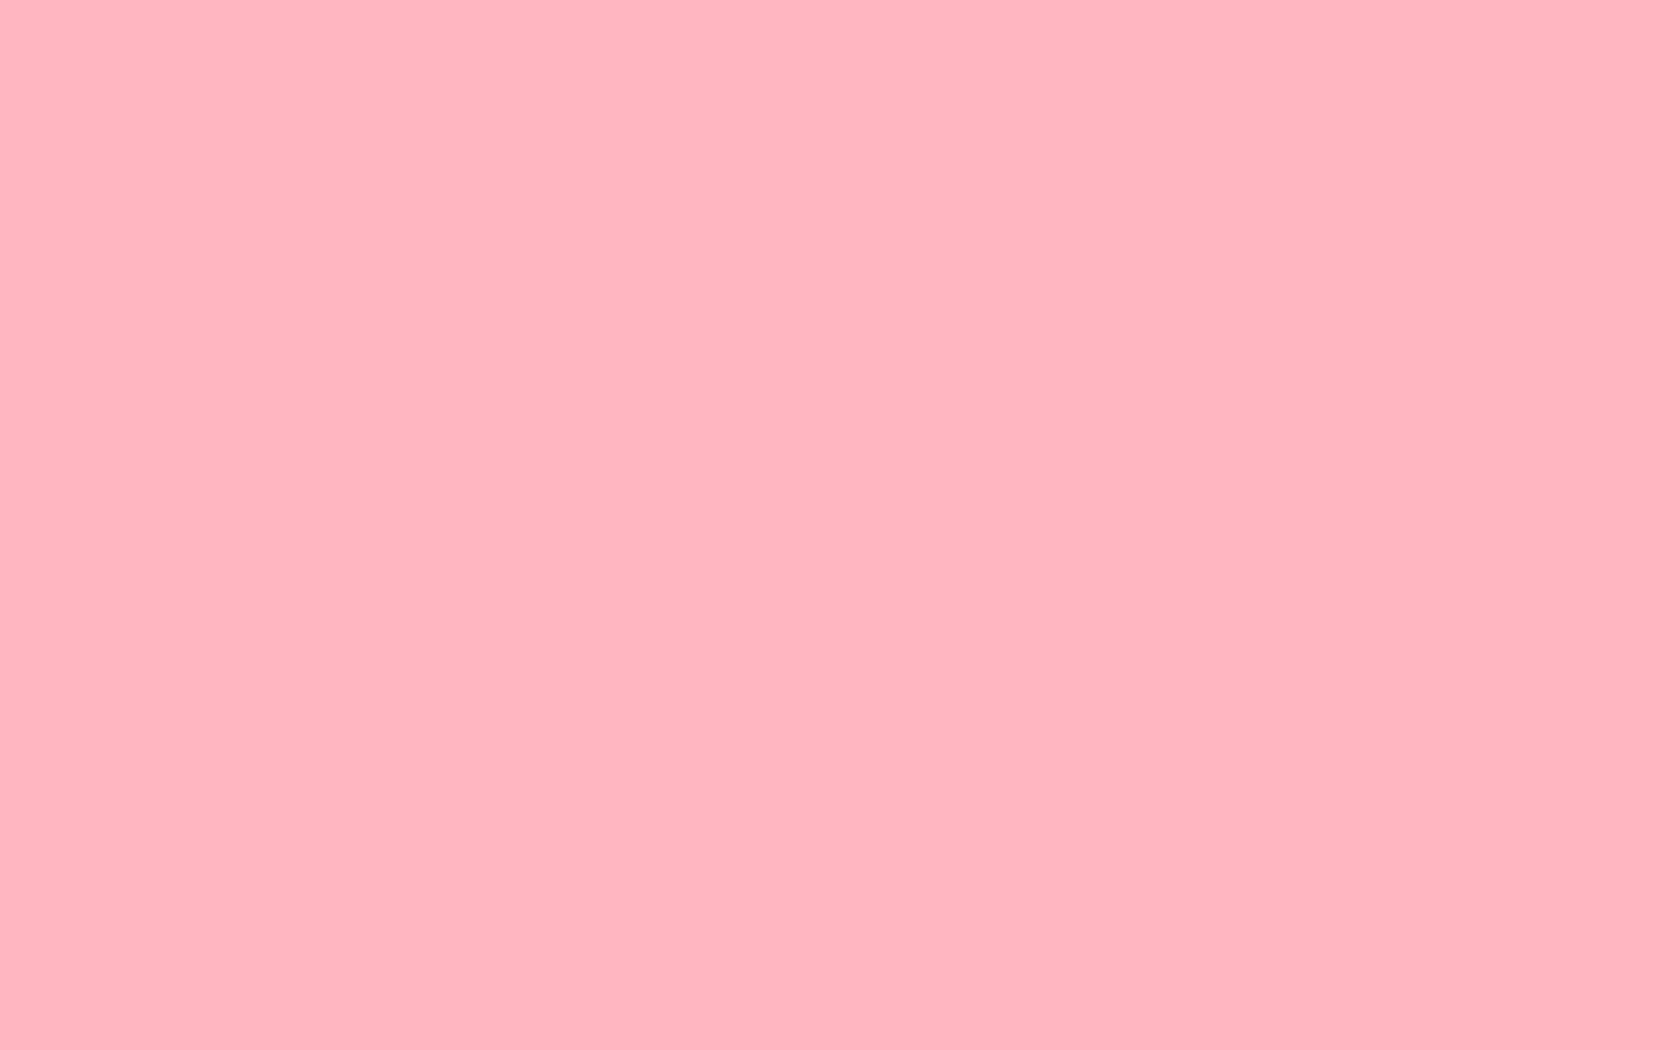 Free 1680x1050 resolution Light Pink solid color background view and